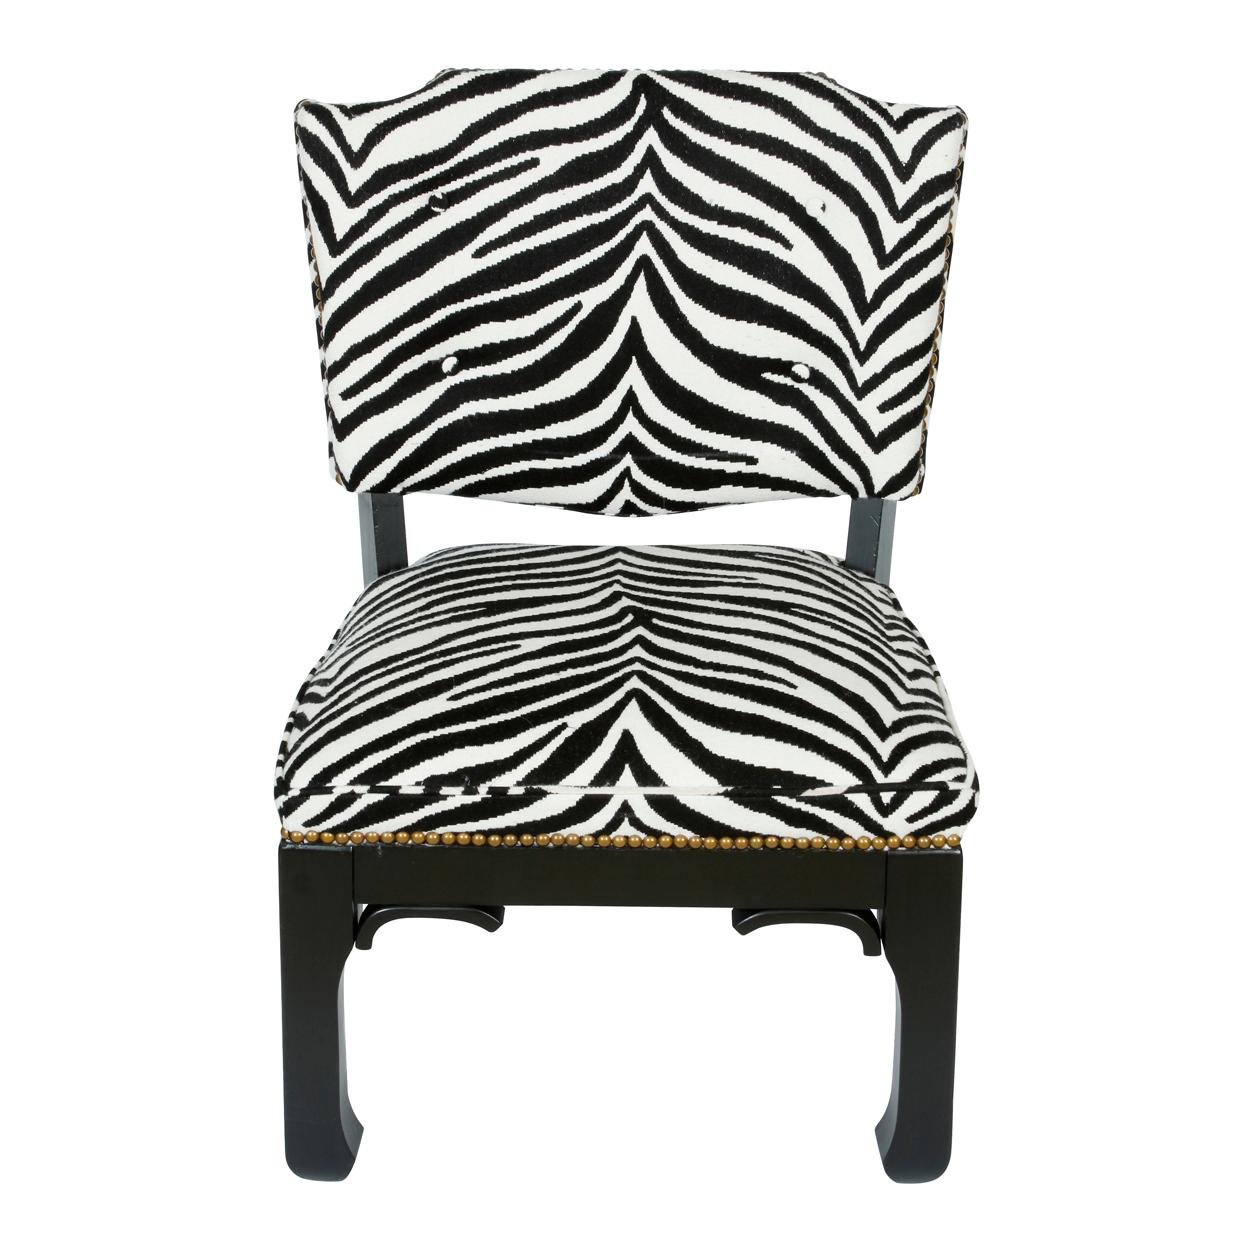 A pair of newly reupholstered black and white zebra print fabric low slipper chairs, ming styling, in the style of James Mont.